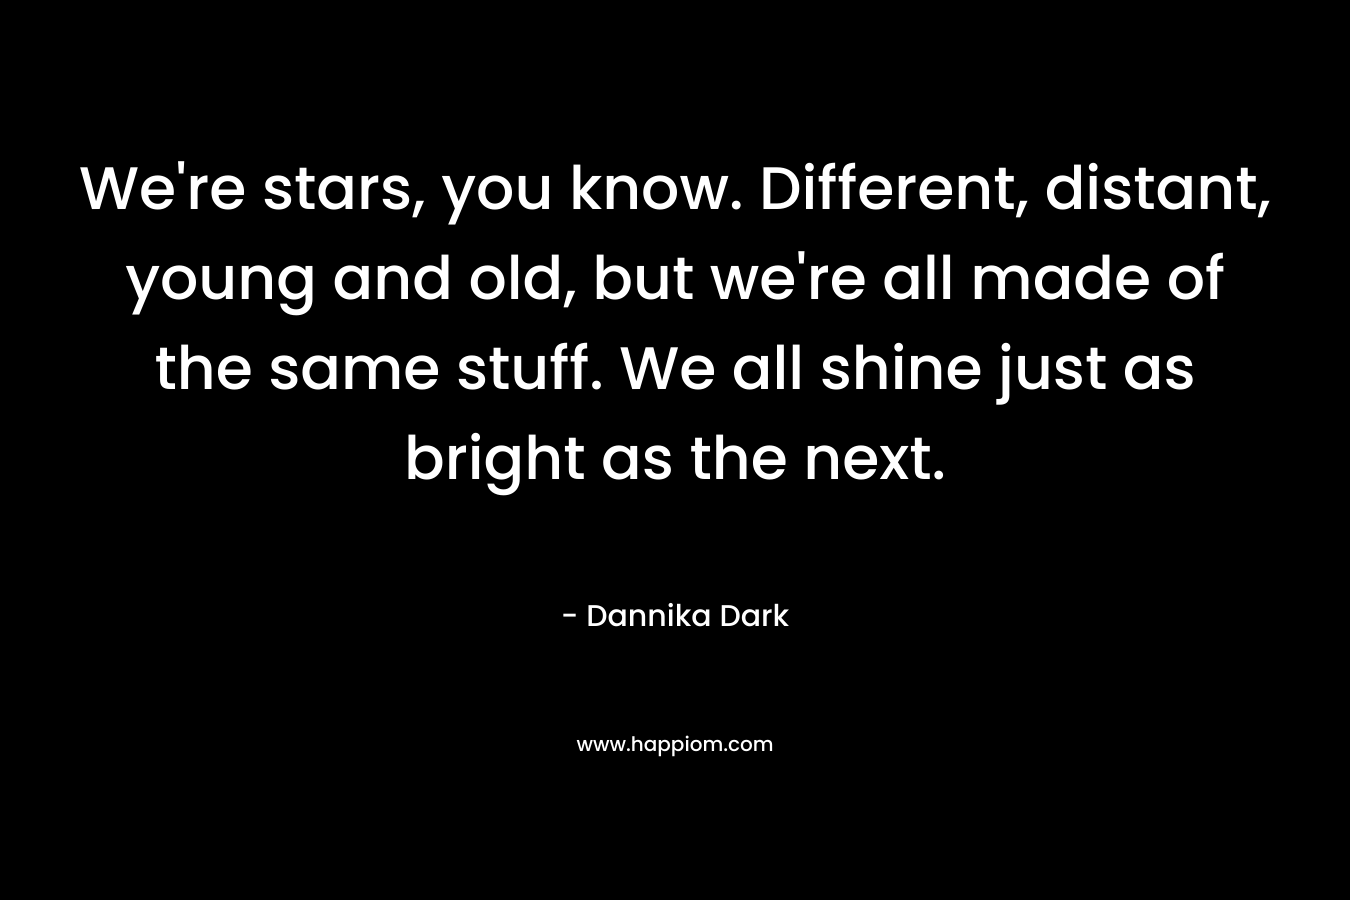 We're stars, you know. Different, distant, young and old, but we're all made of the same stuff. We all shine just as bright as the next.